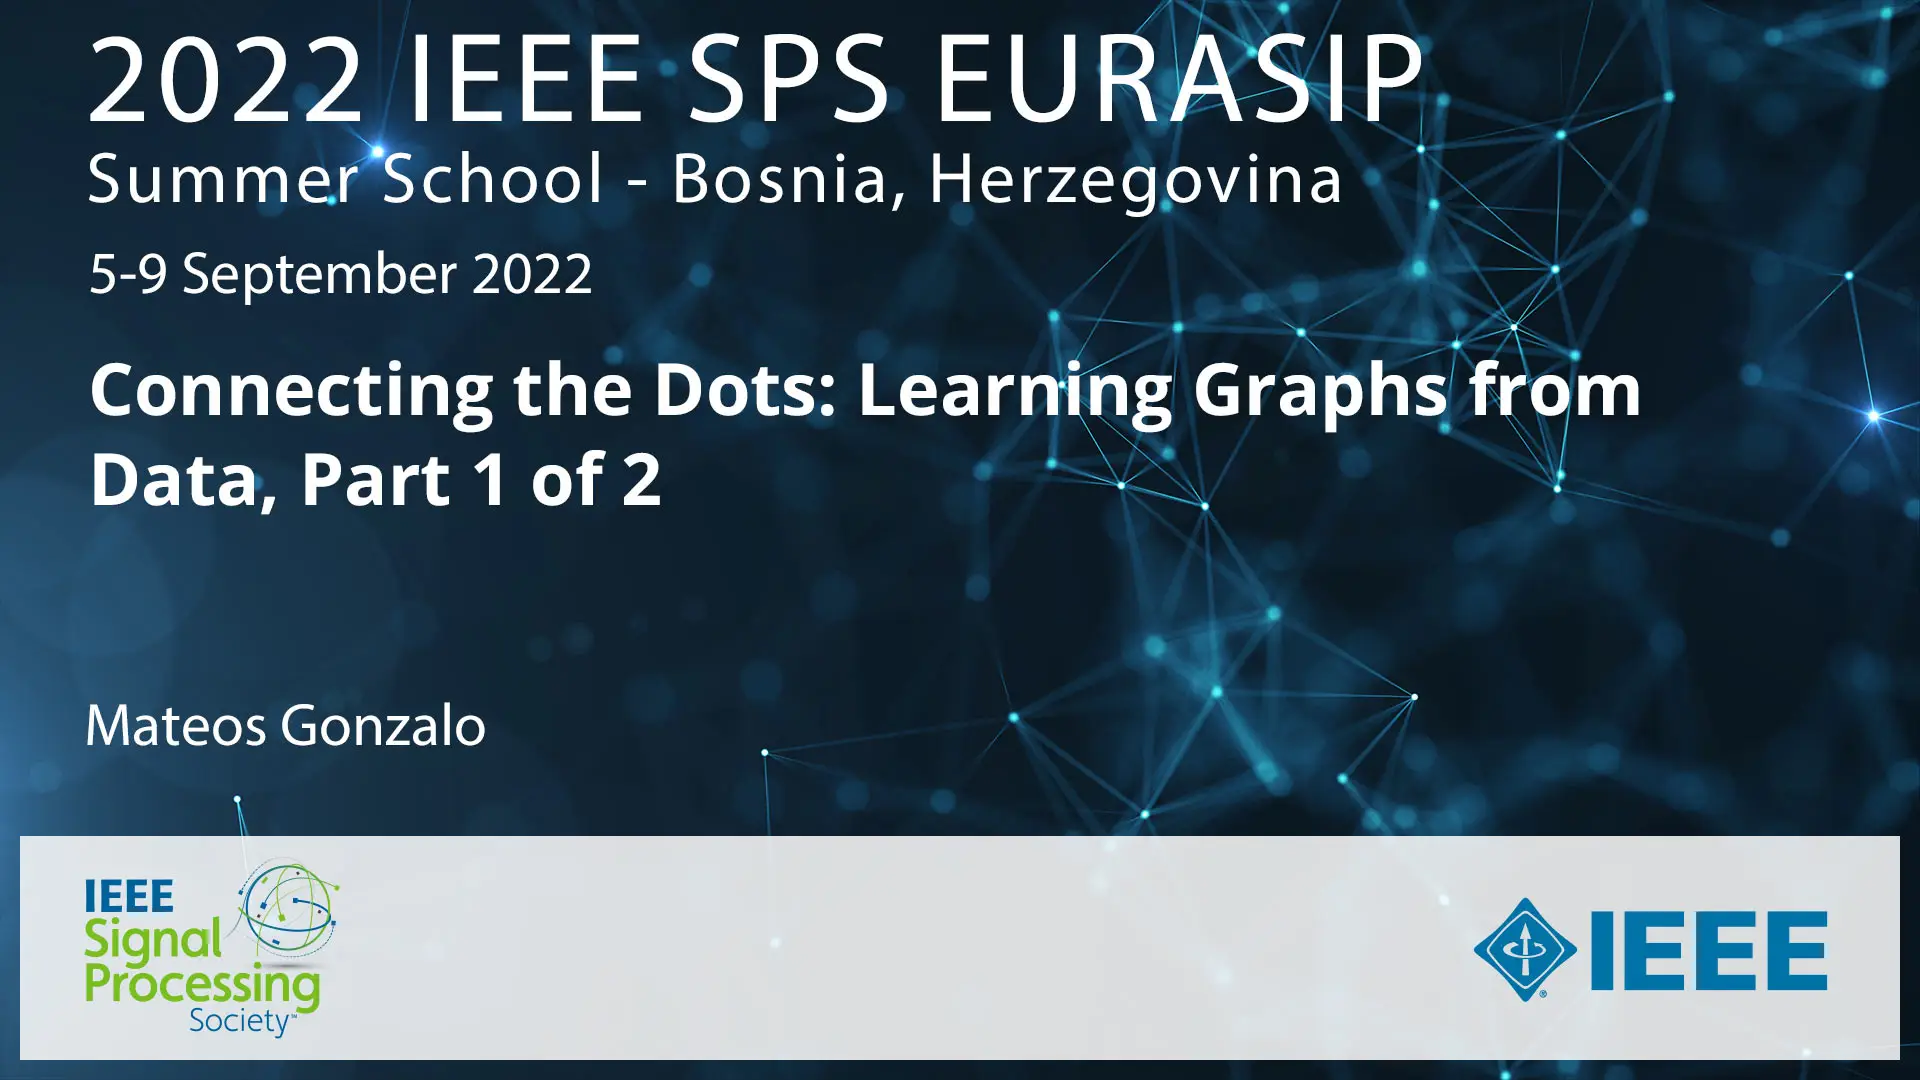 Connecting the Dots: Learning Graphs from Data, Part 1 of 2